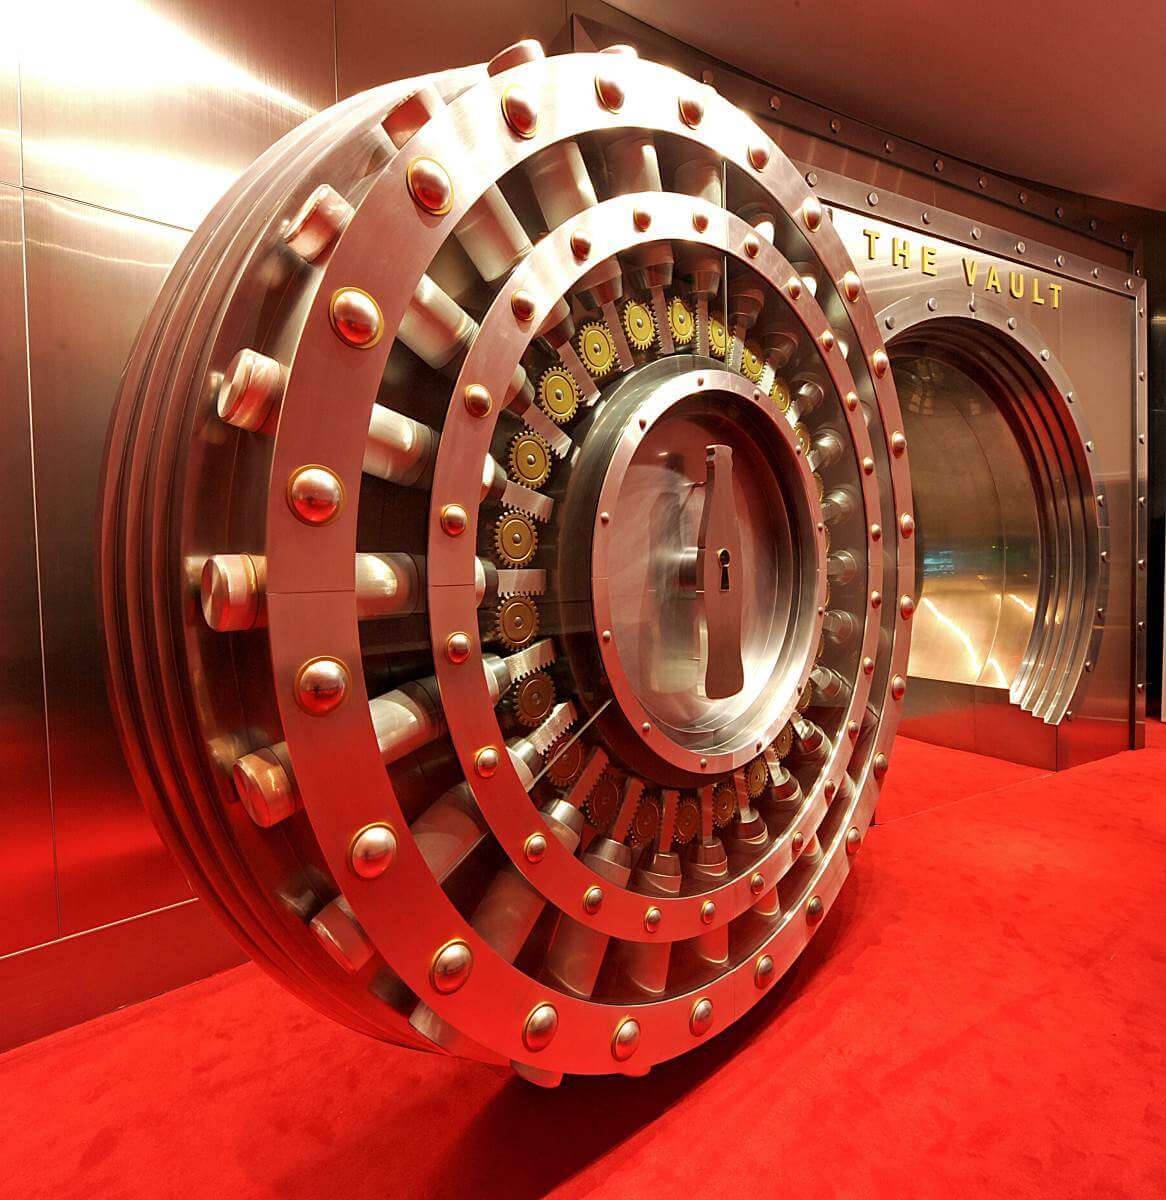 The Vault at the World of Coca-Cola - Kids Are A Trip